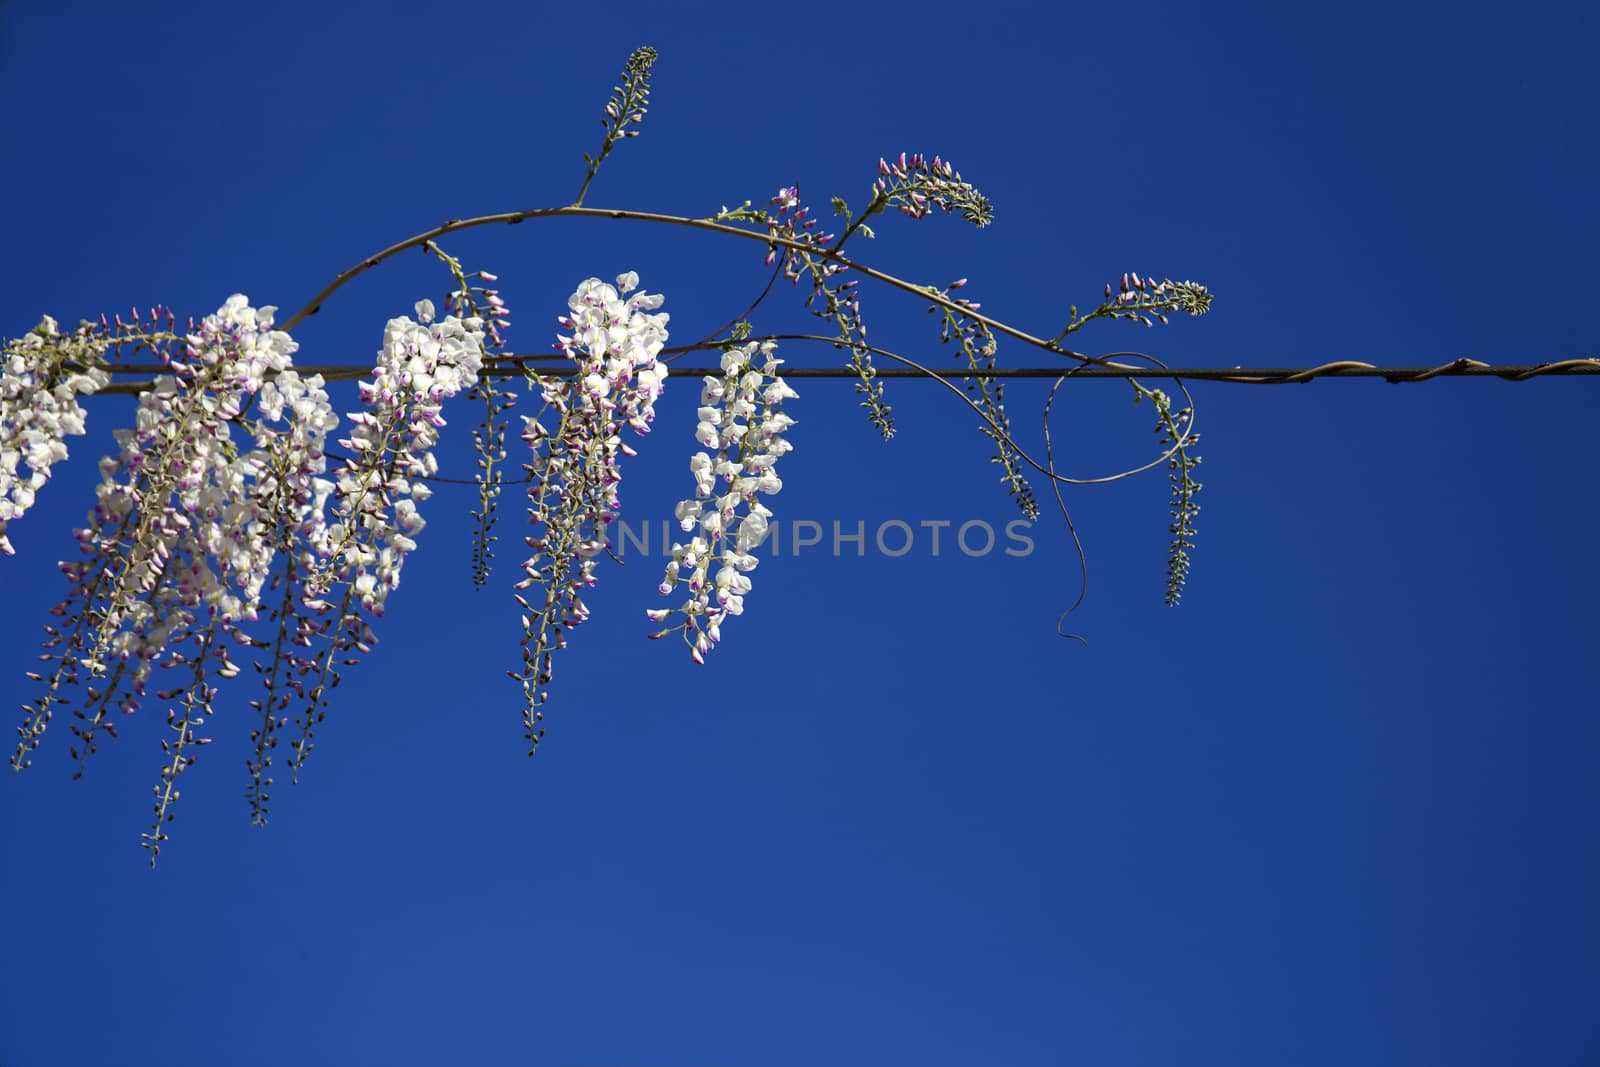 Wisteria Vine in bloom with bright white flowers. by Anelik